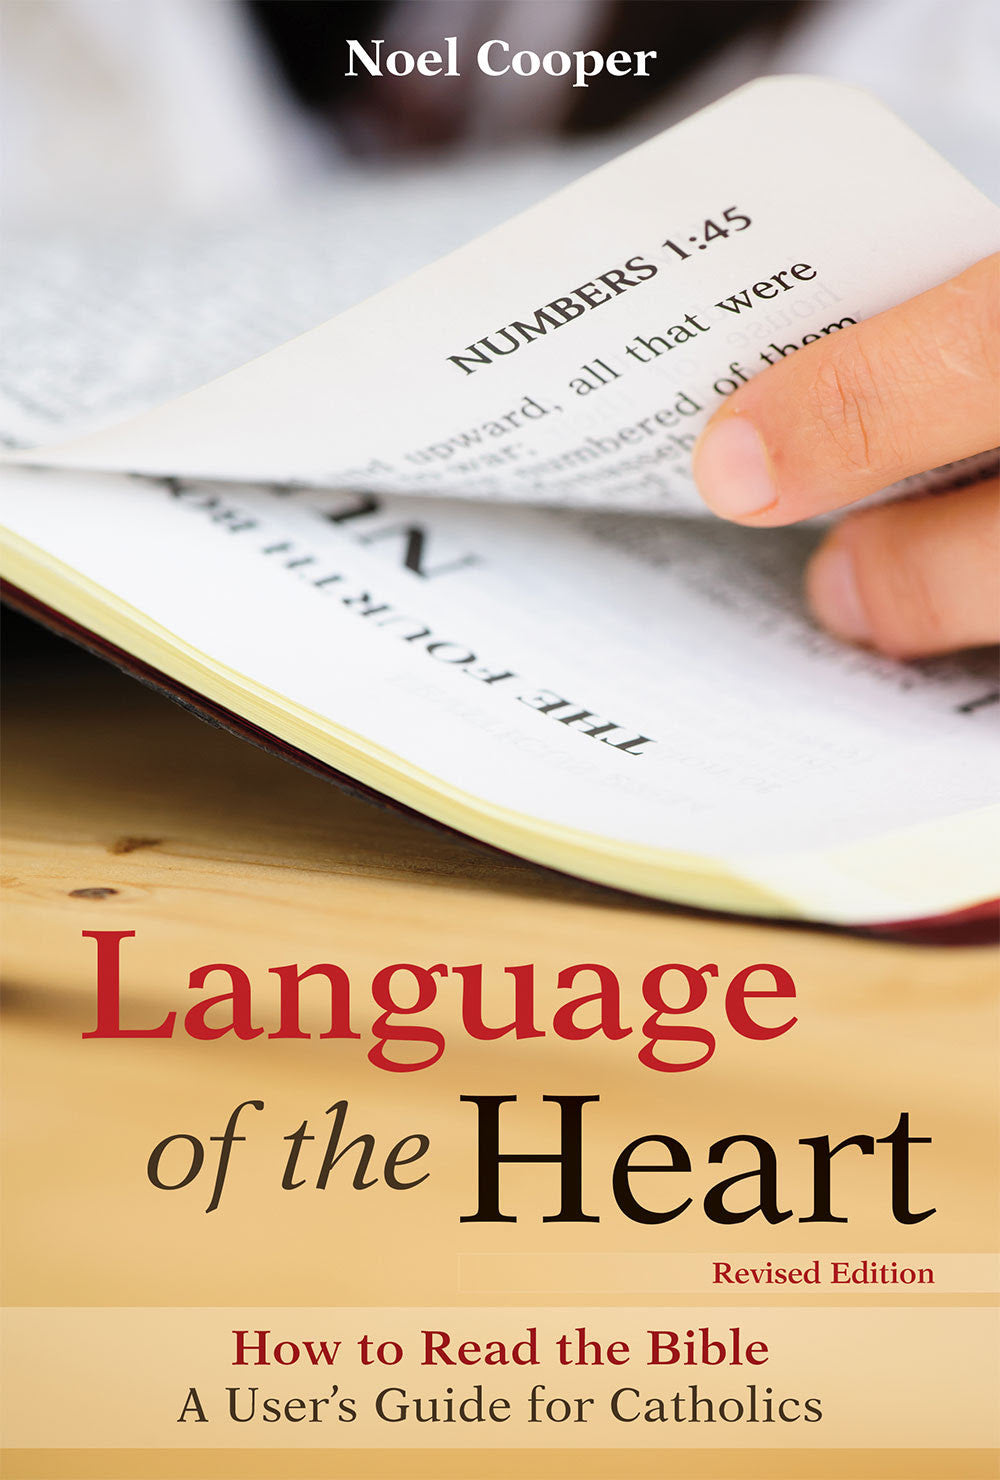 Language of the Heart (Revised Edition)